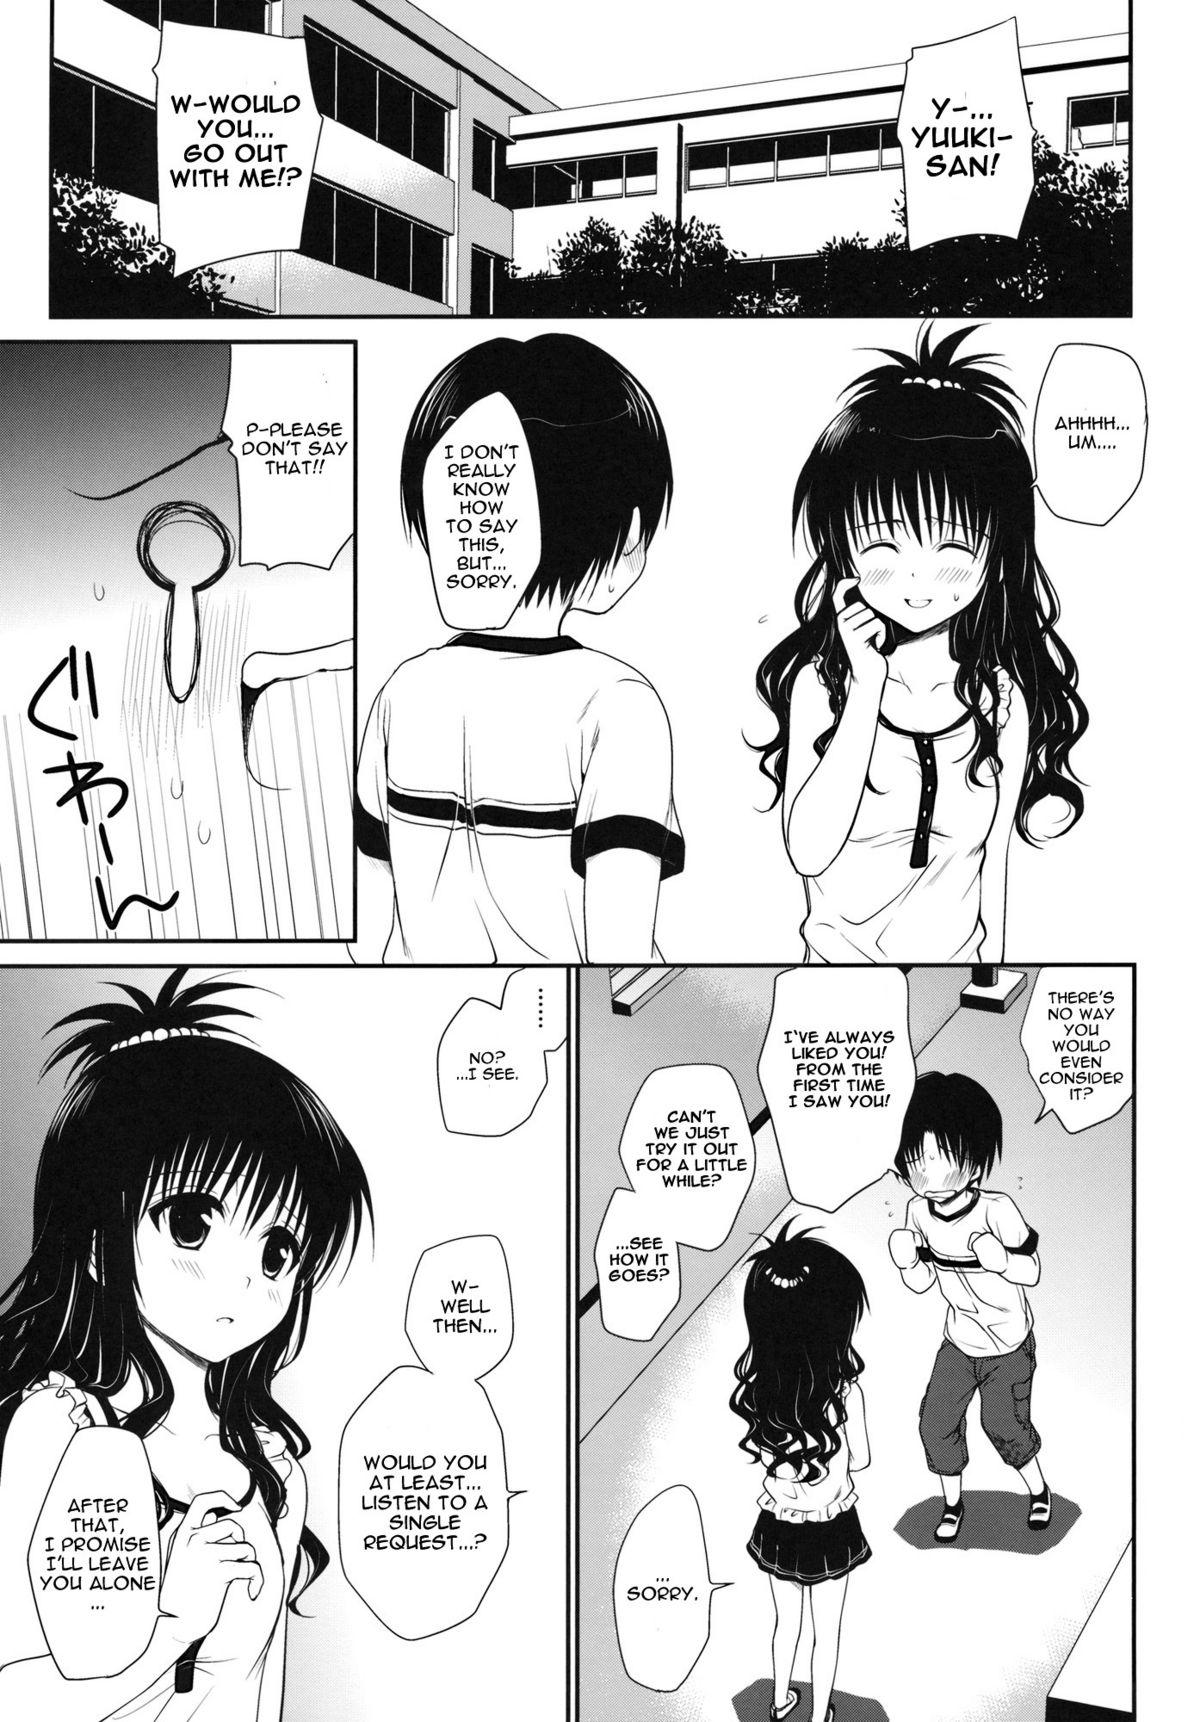 Club Houkago Mikan | After-School Mikan - To love-ru Pee - Page 2